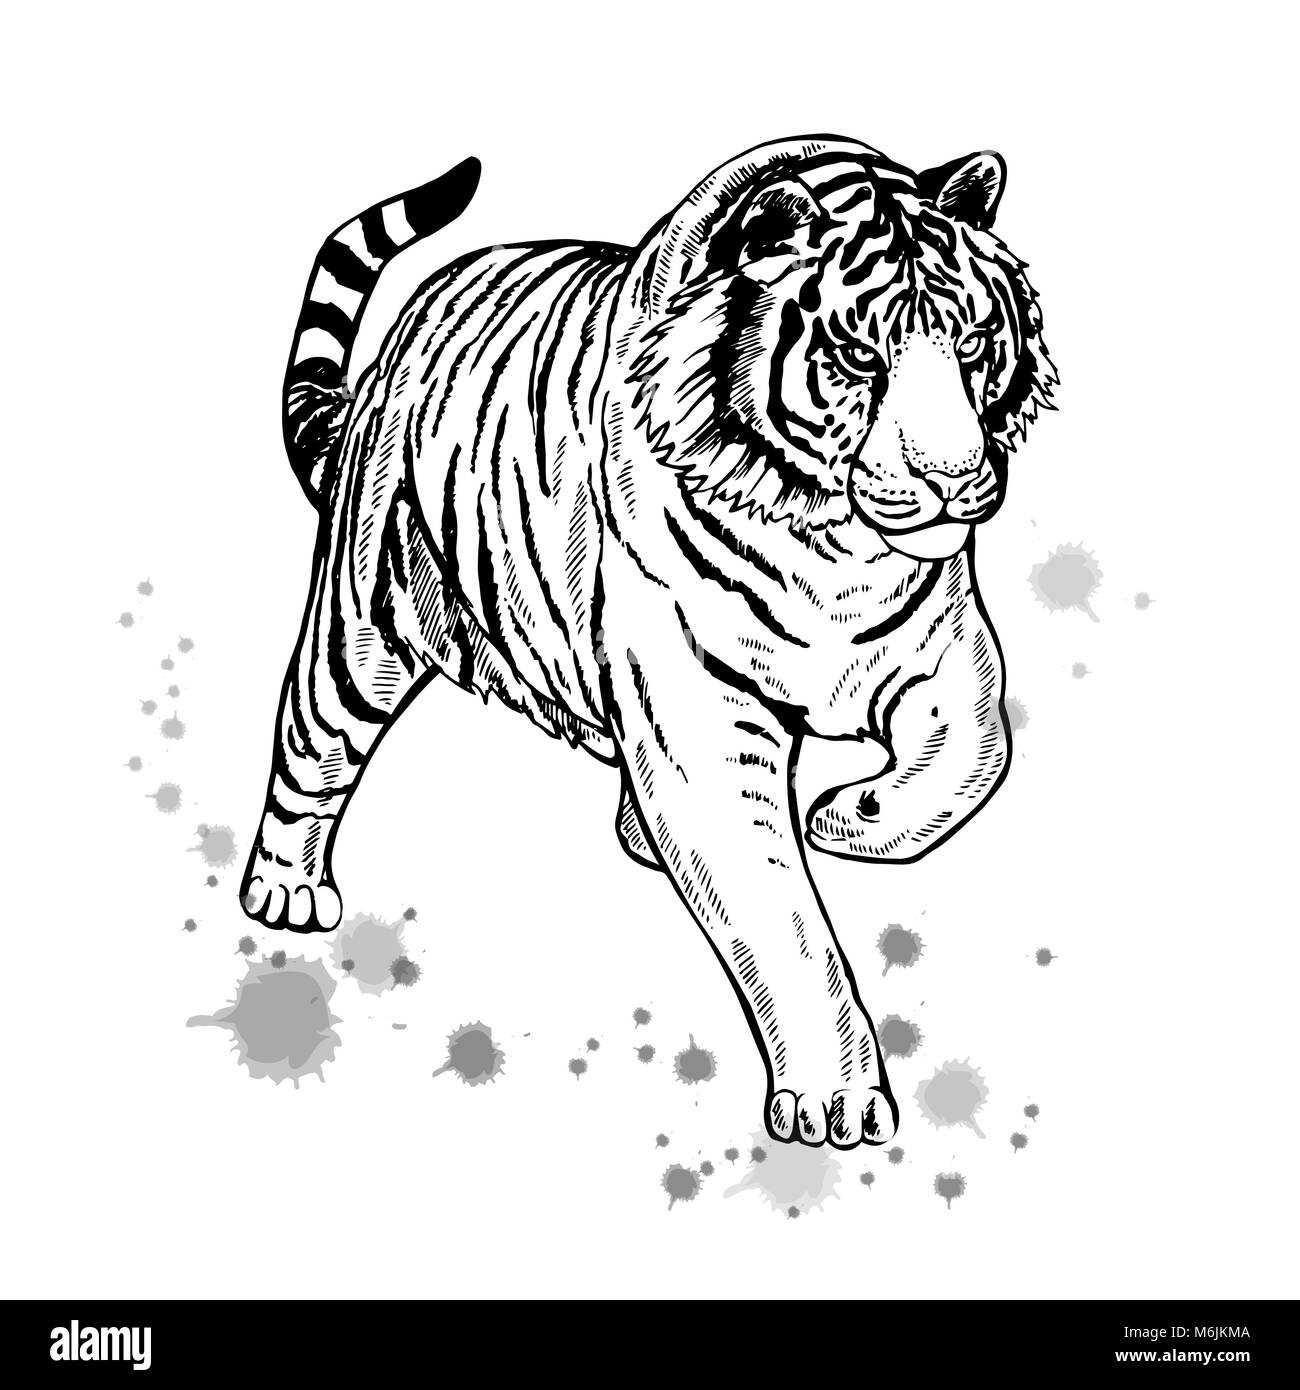 Hand Drawn Sketch Style Tiger Vector Illustration Isolated On White